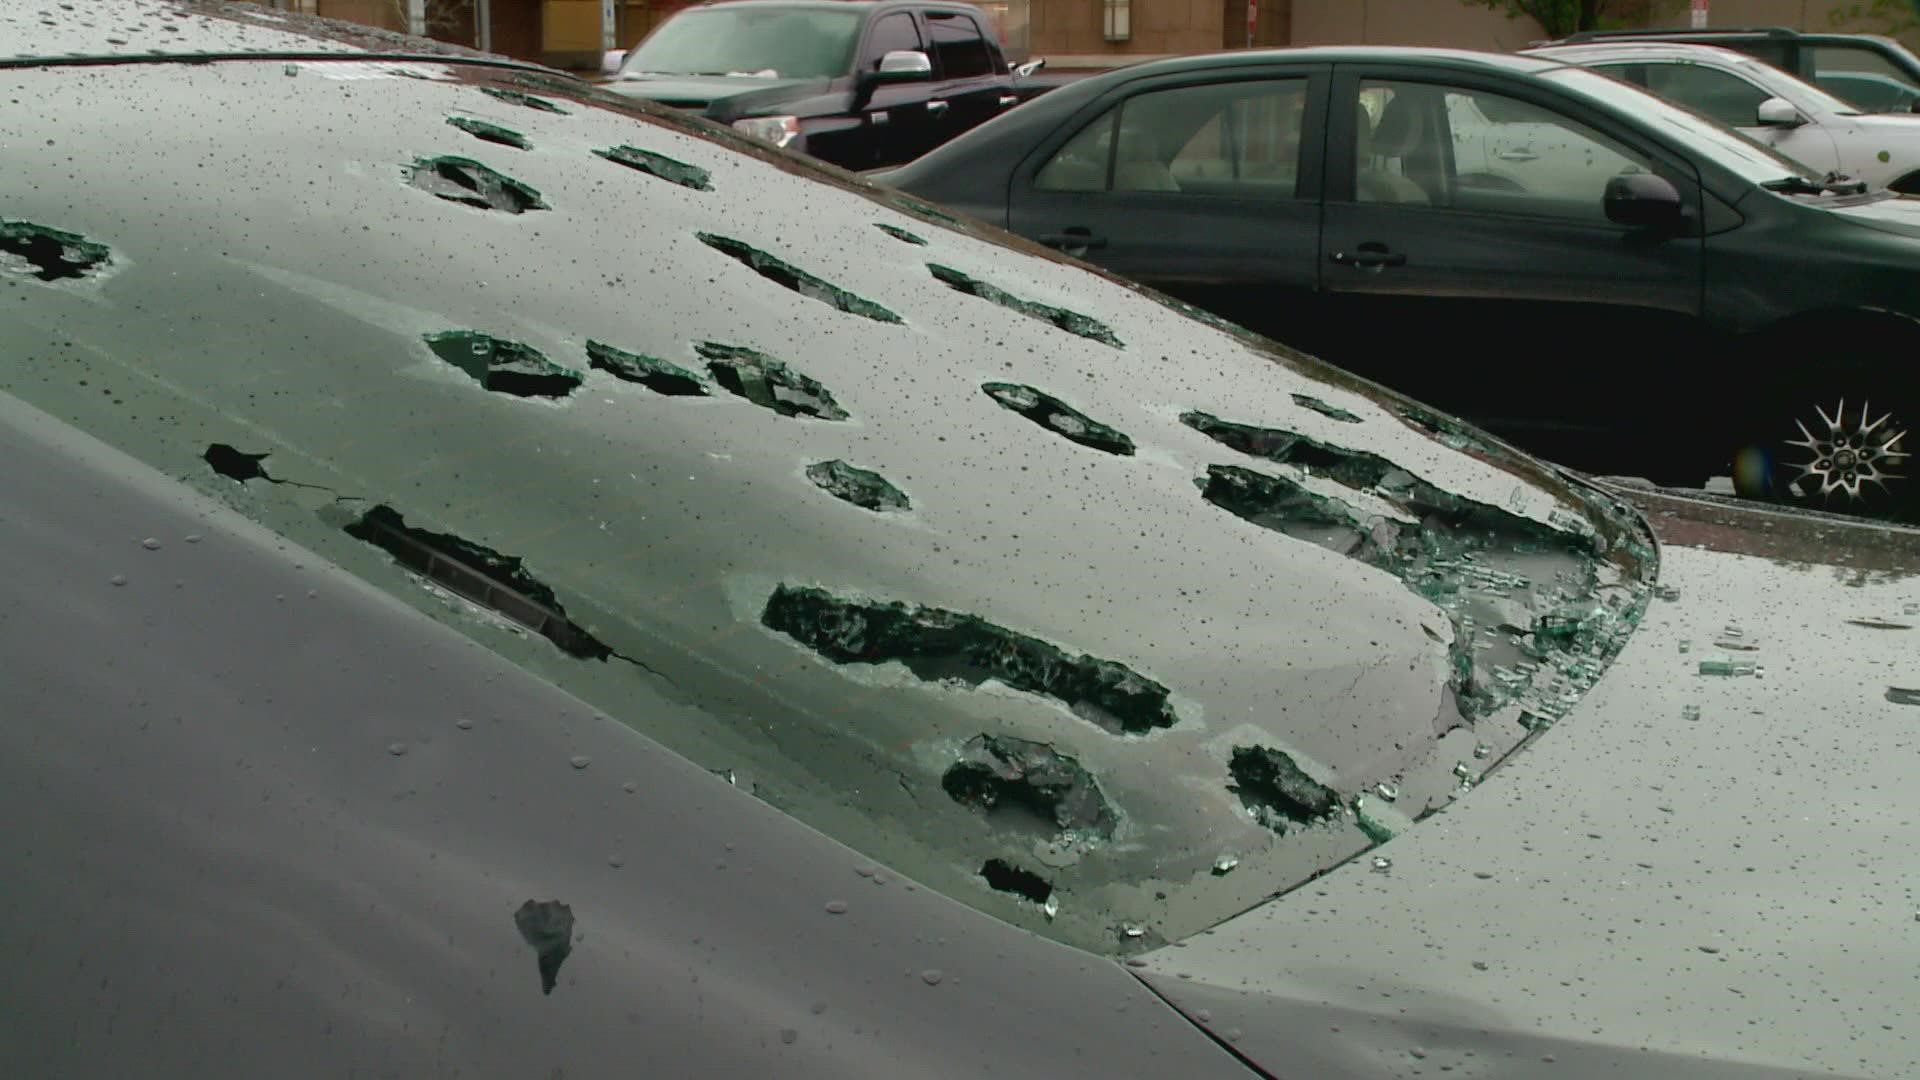 Cory Reppenhagen shows us how hail driven damage is getting more costly.